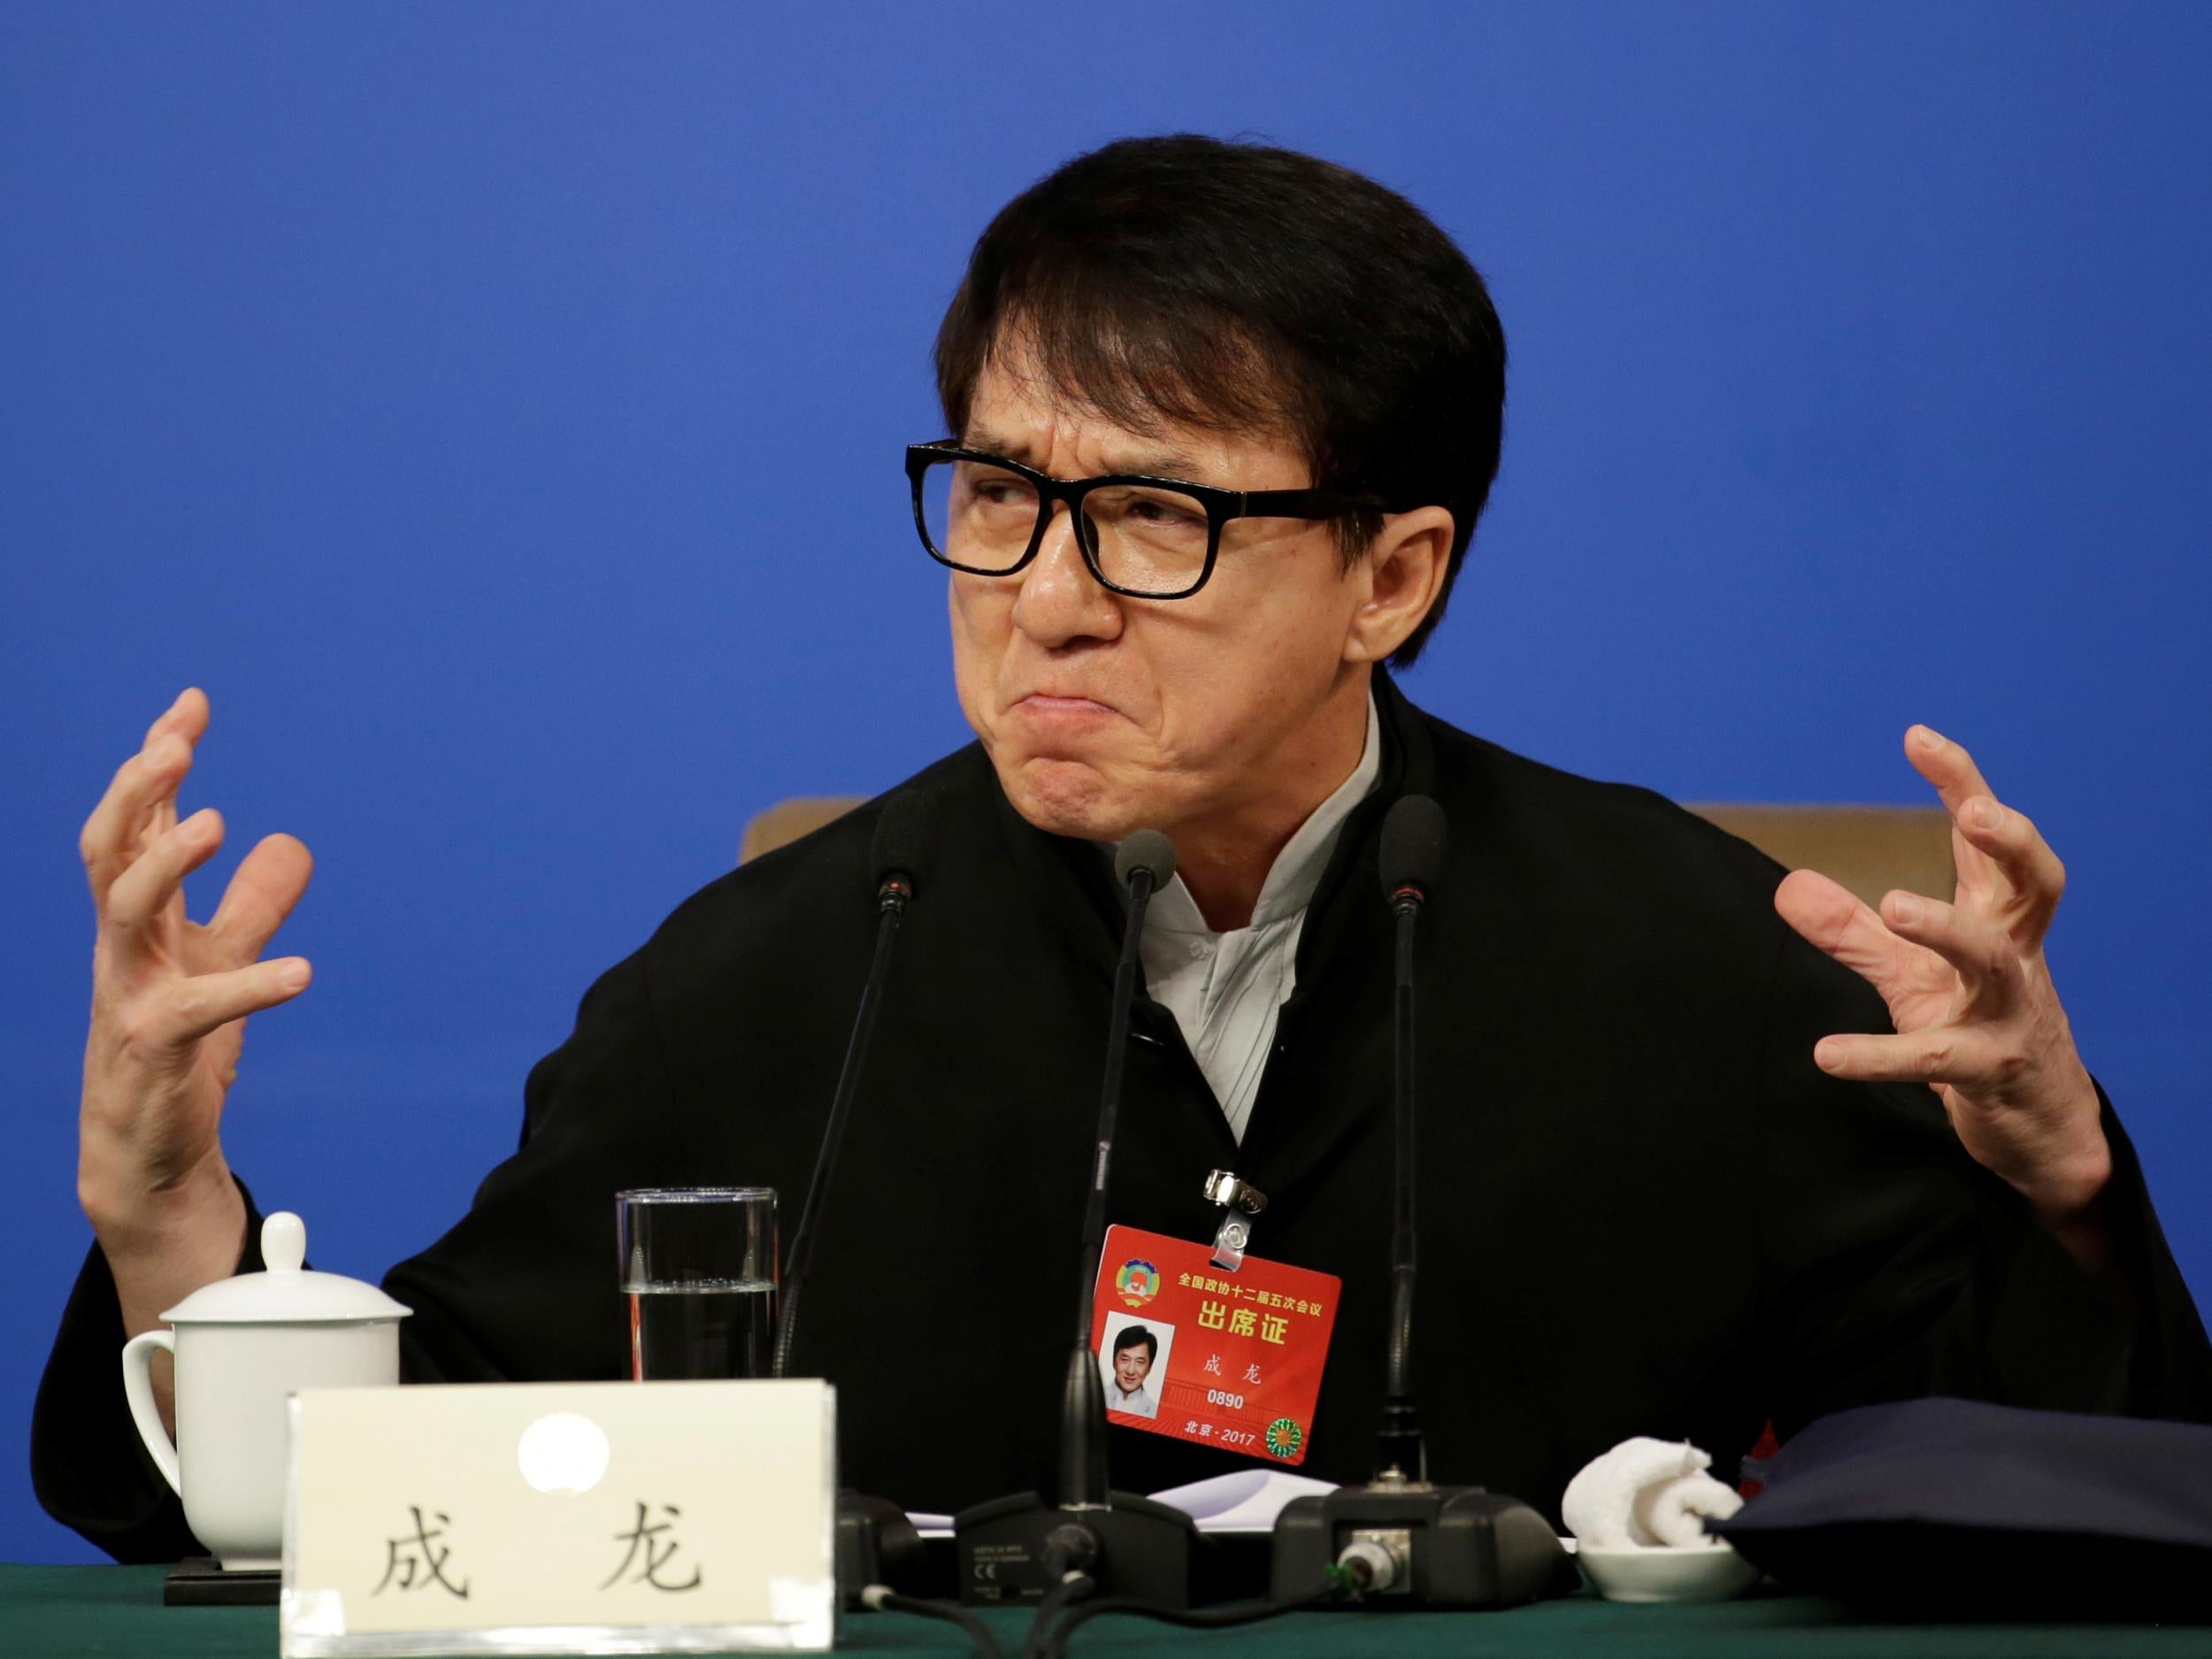 Jackie Chan attends a news conference during the National People's Congress in China this week